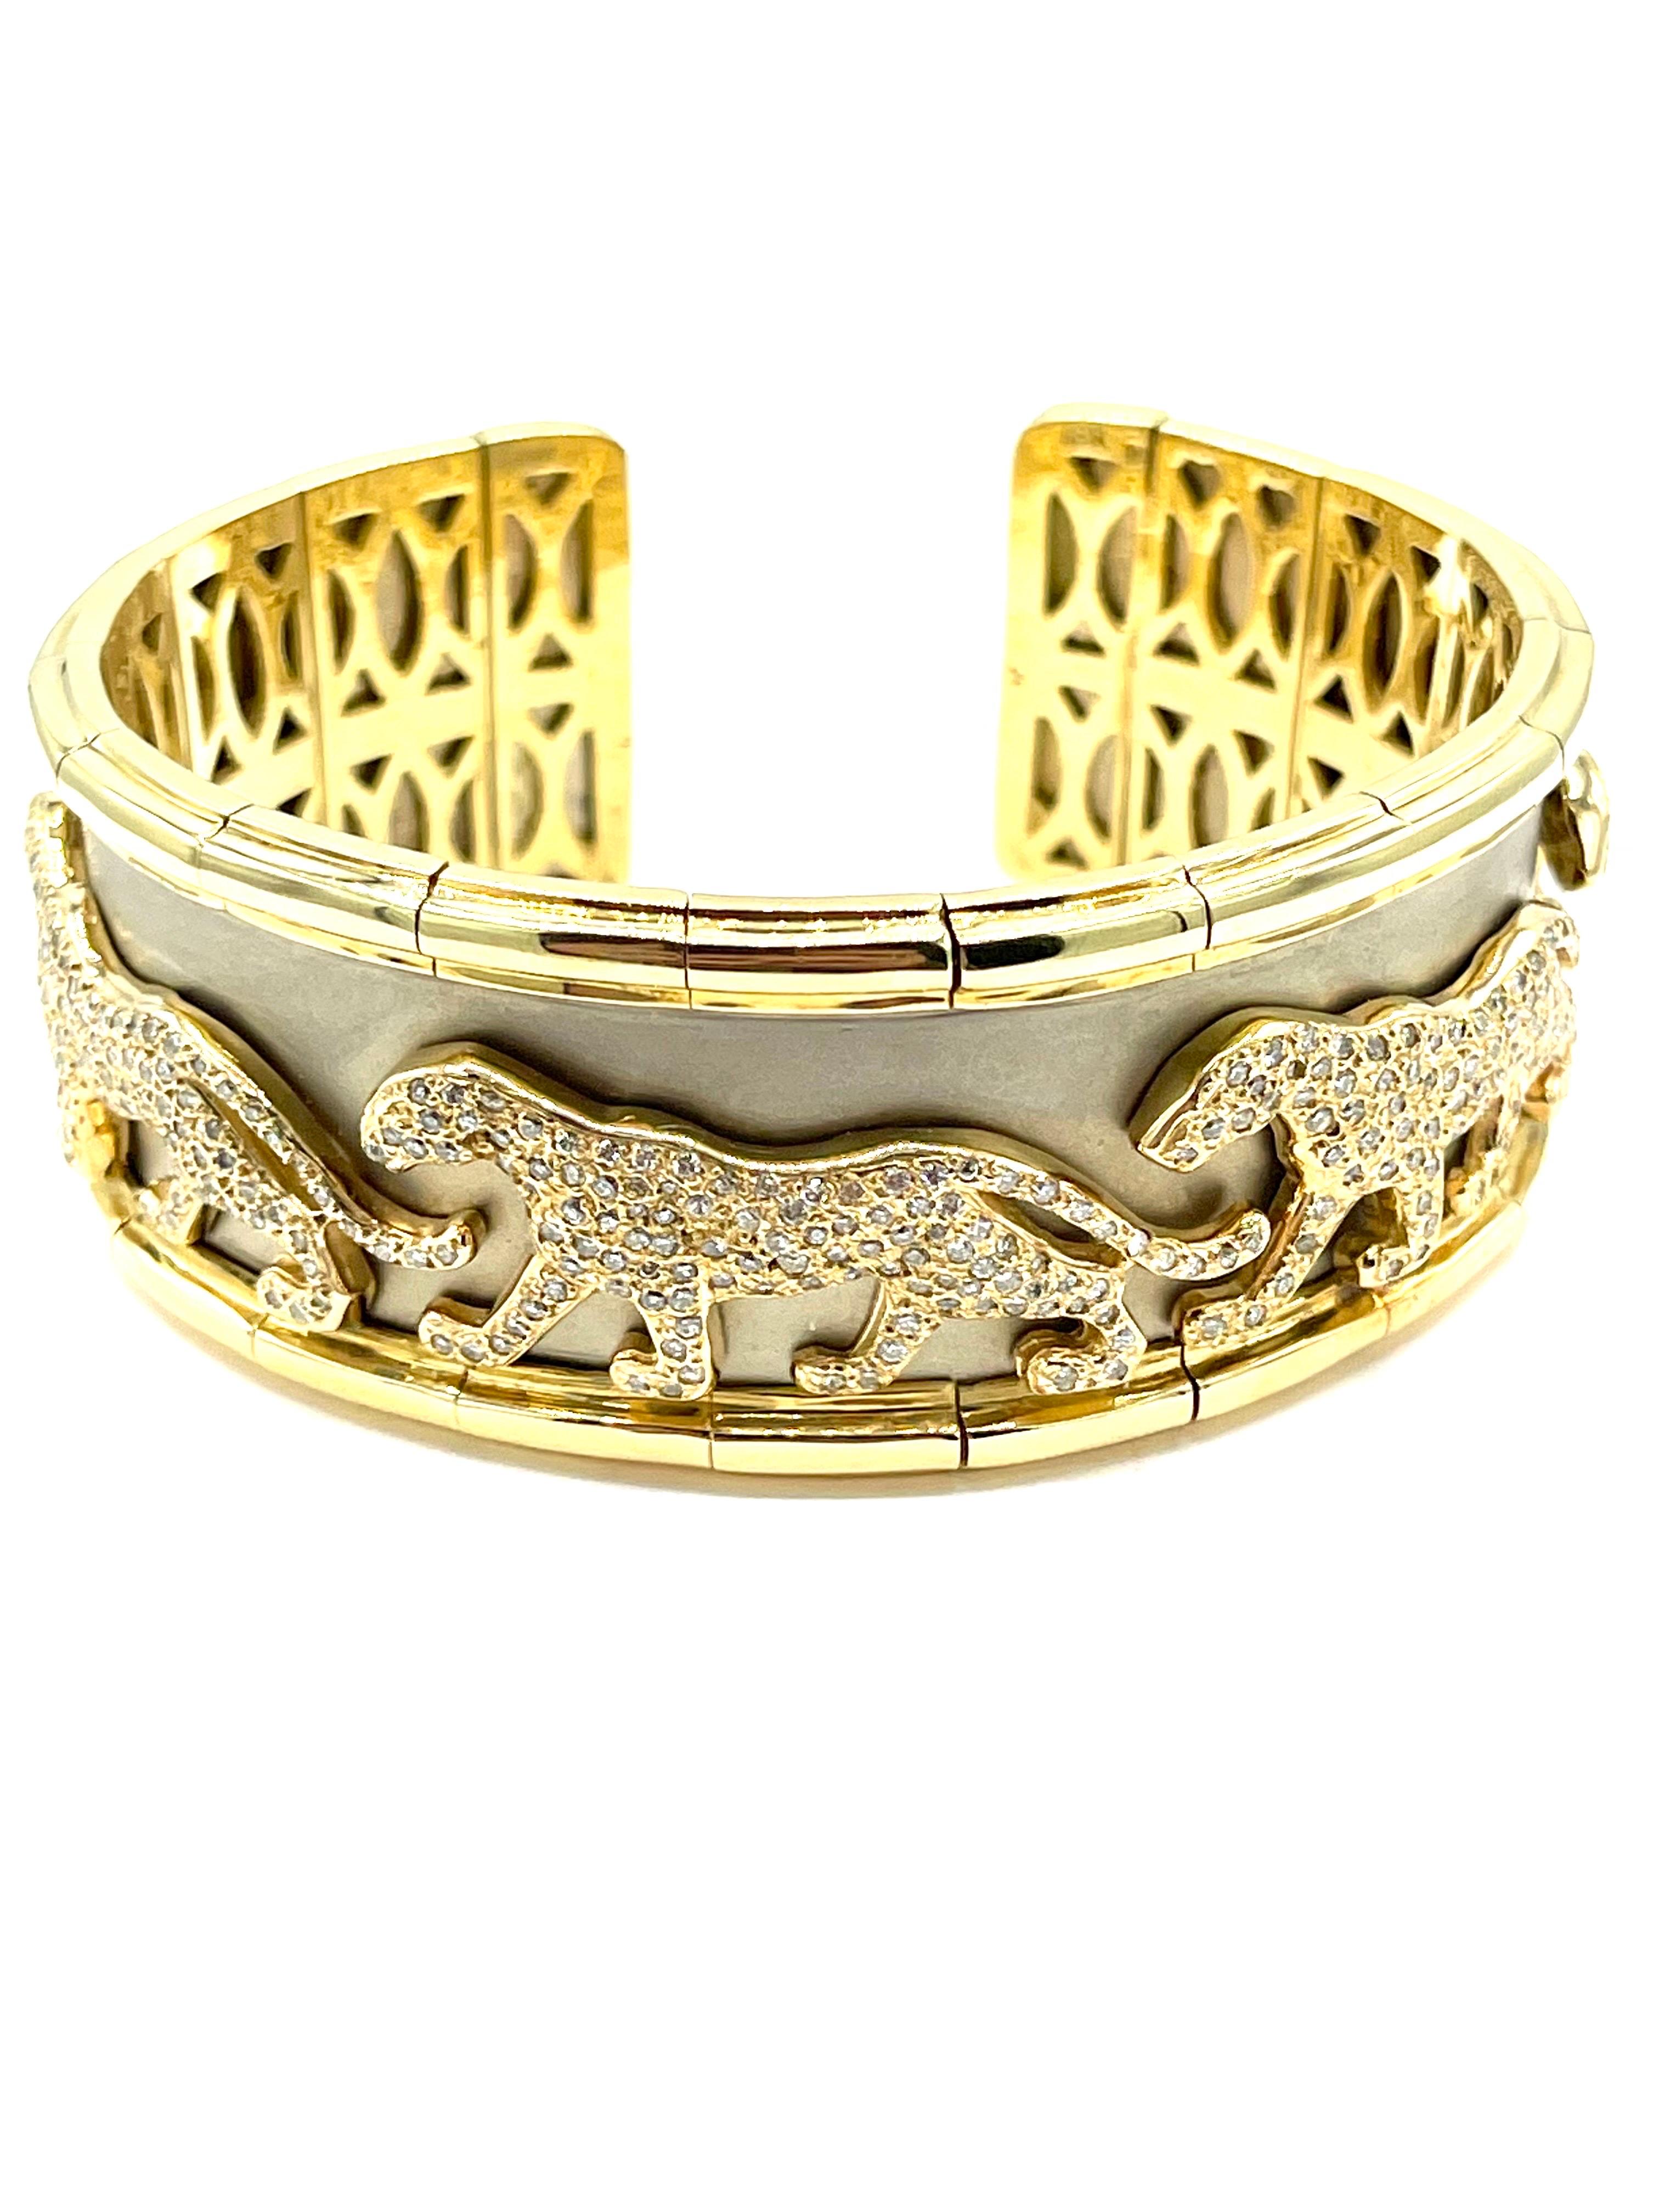 A beautifully handcrafted Diamond panther bracelet!  There are five pave diamond panthers, each containing 103 round brilliant Diamonds, set on a matte finished white gold inlay, on an 18k yellow gold frame.  The diamonds make up a total weight of